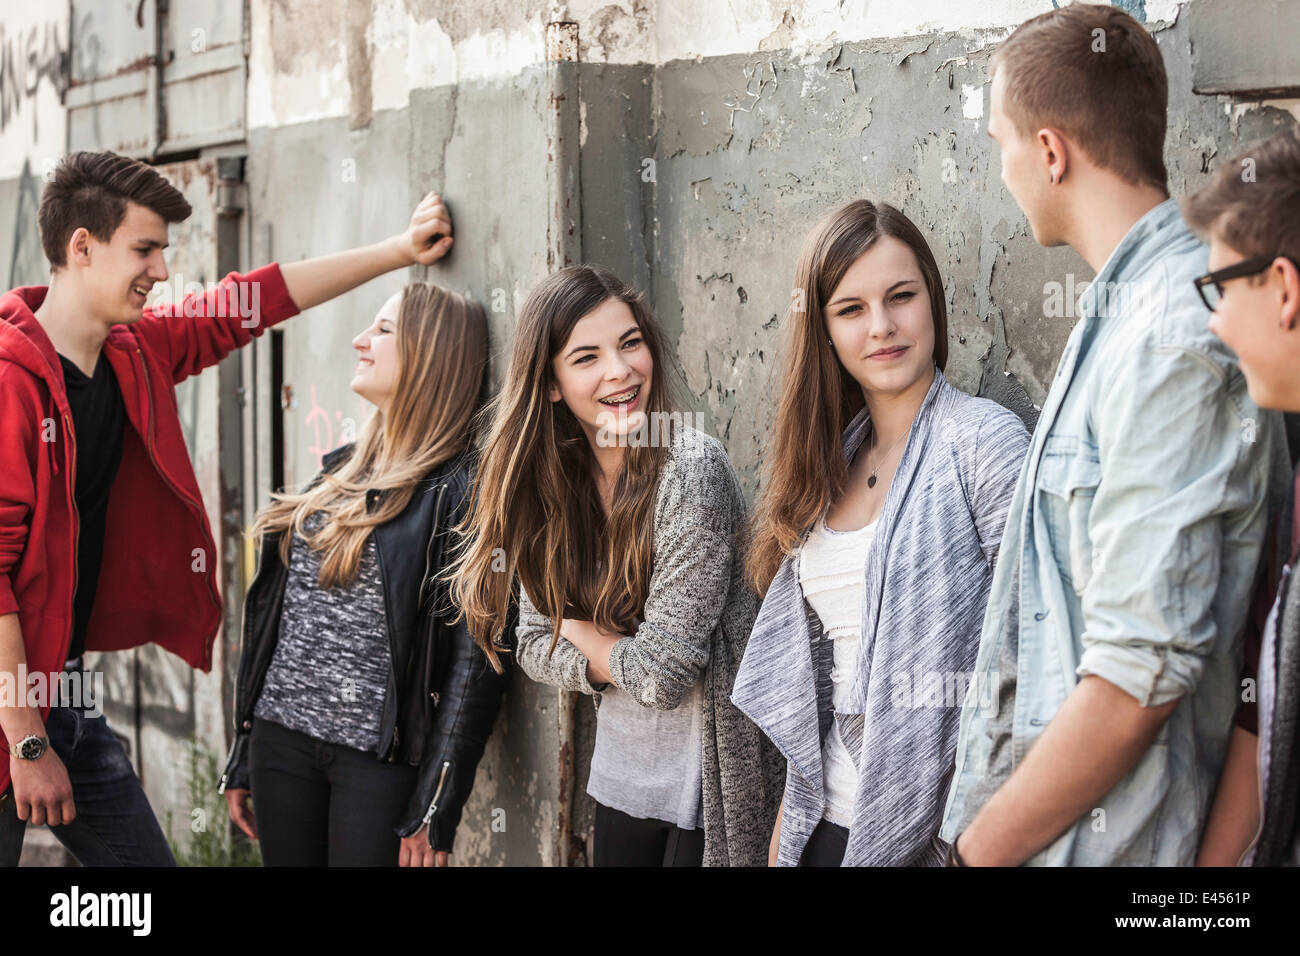 Teenagers hanging out at abandoned building Stock Photo